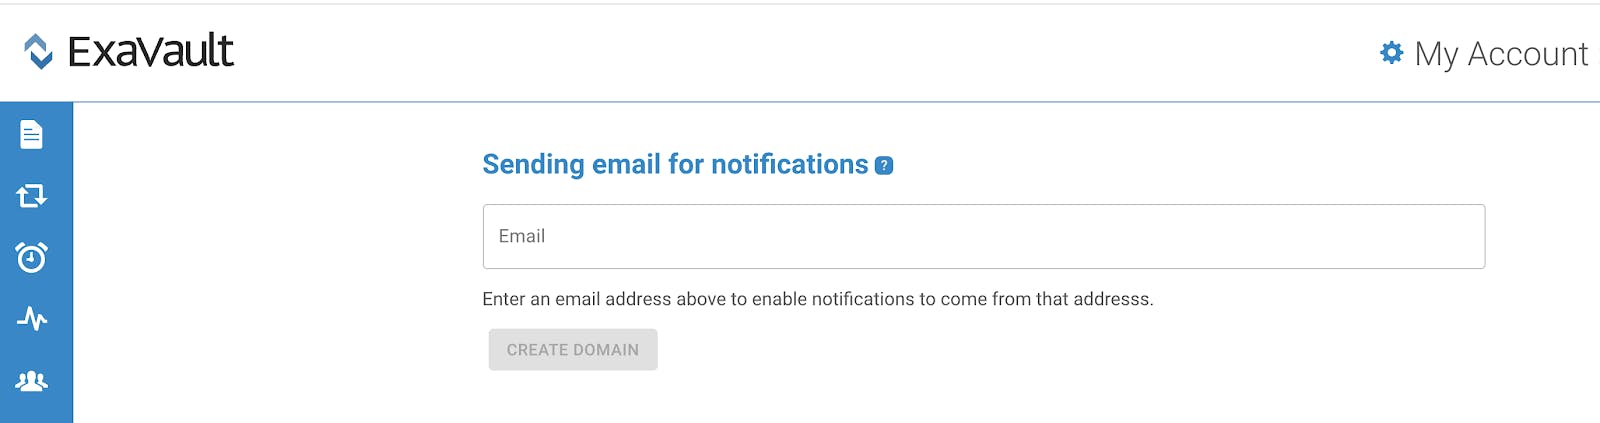 Customize sending email for notifications.